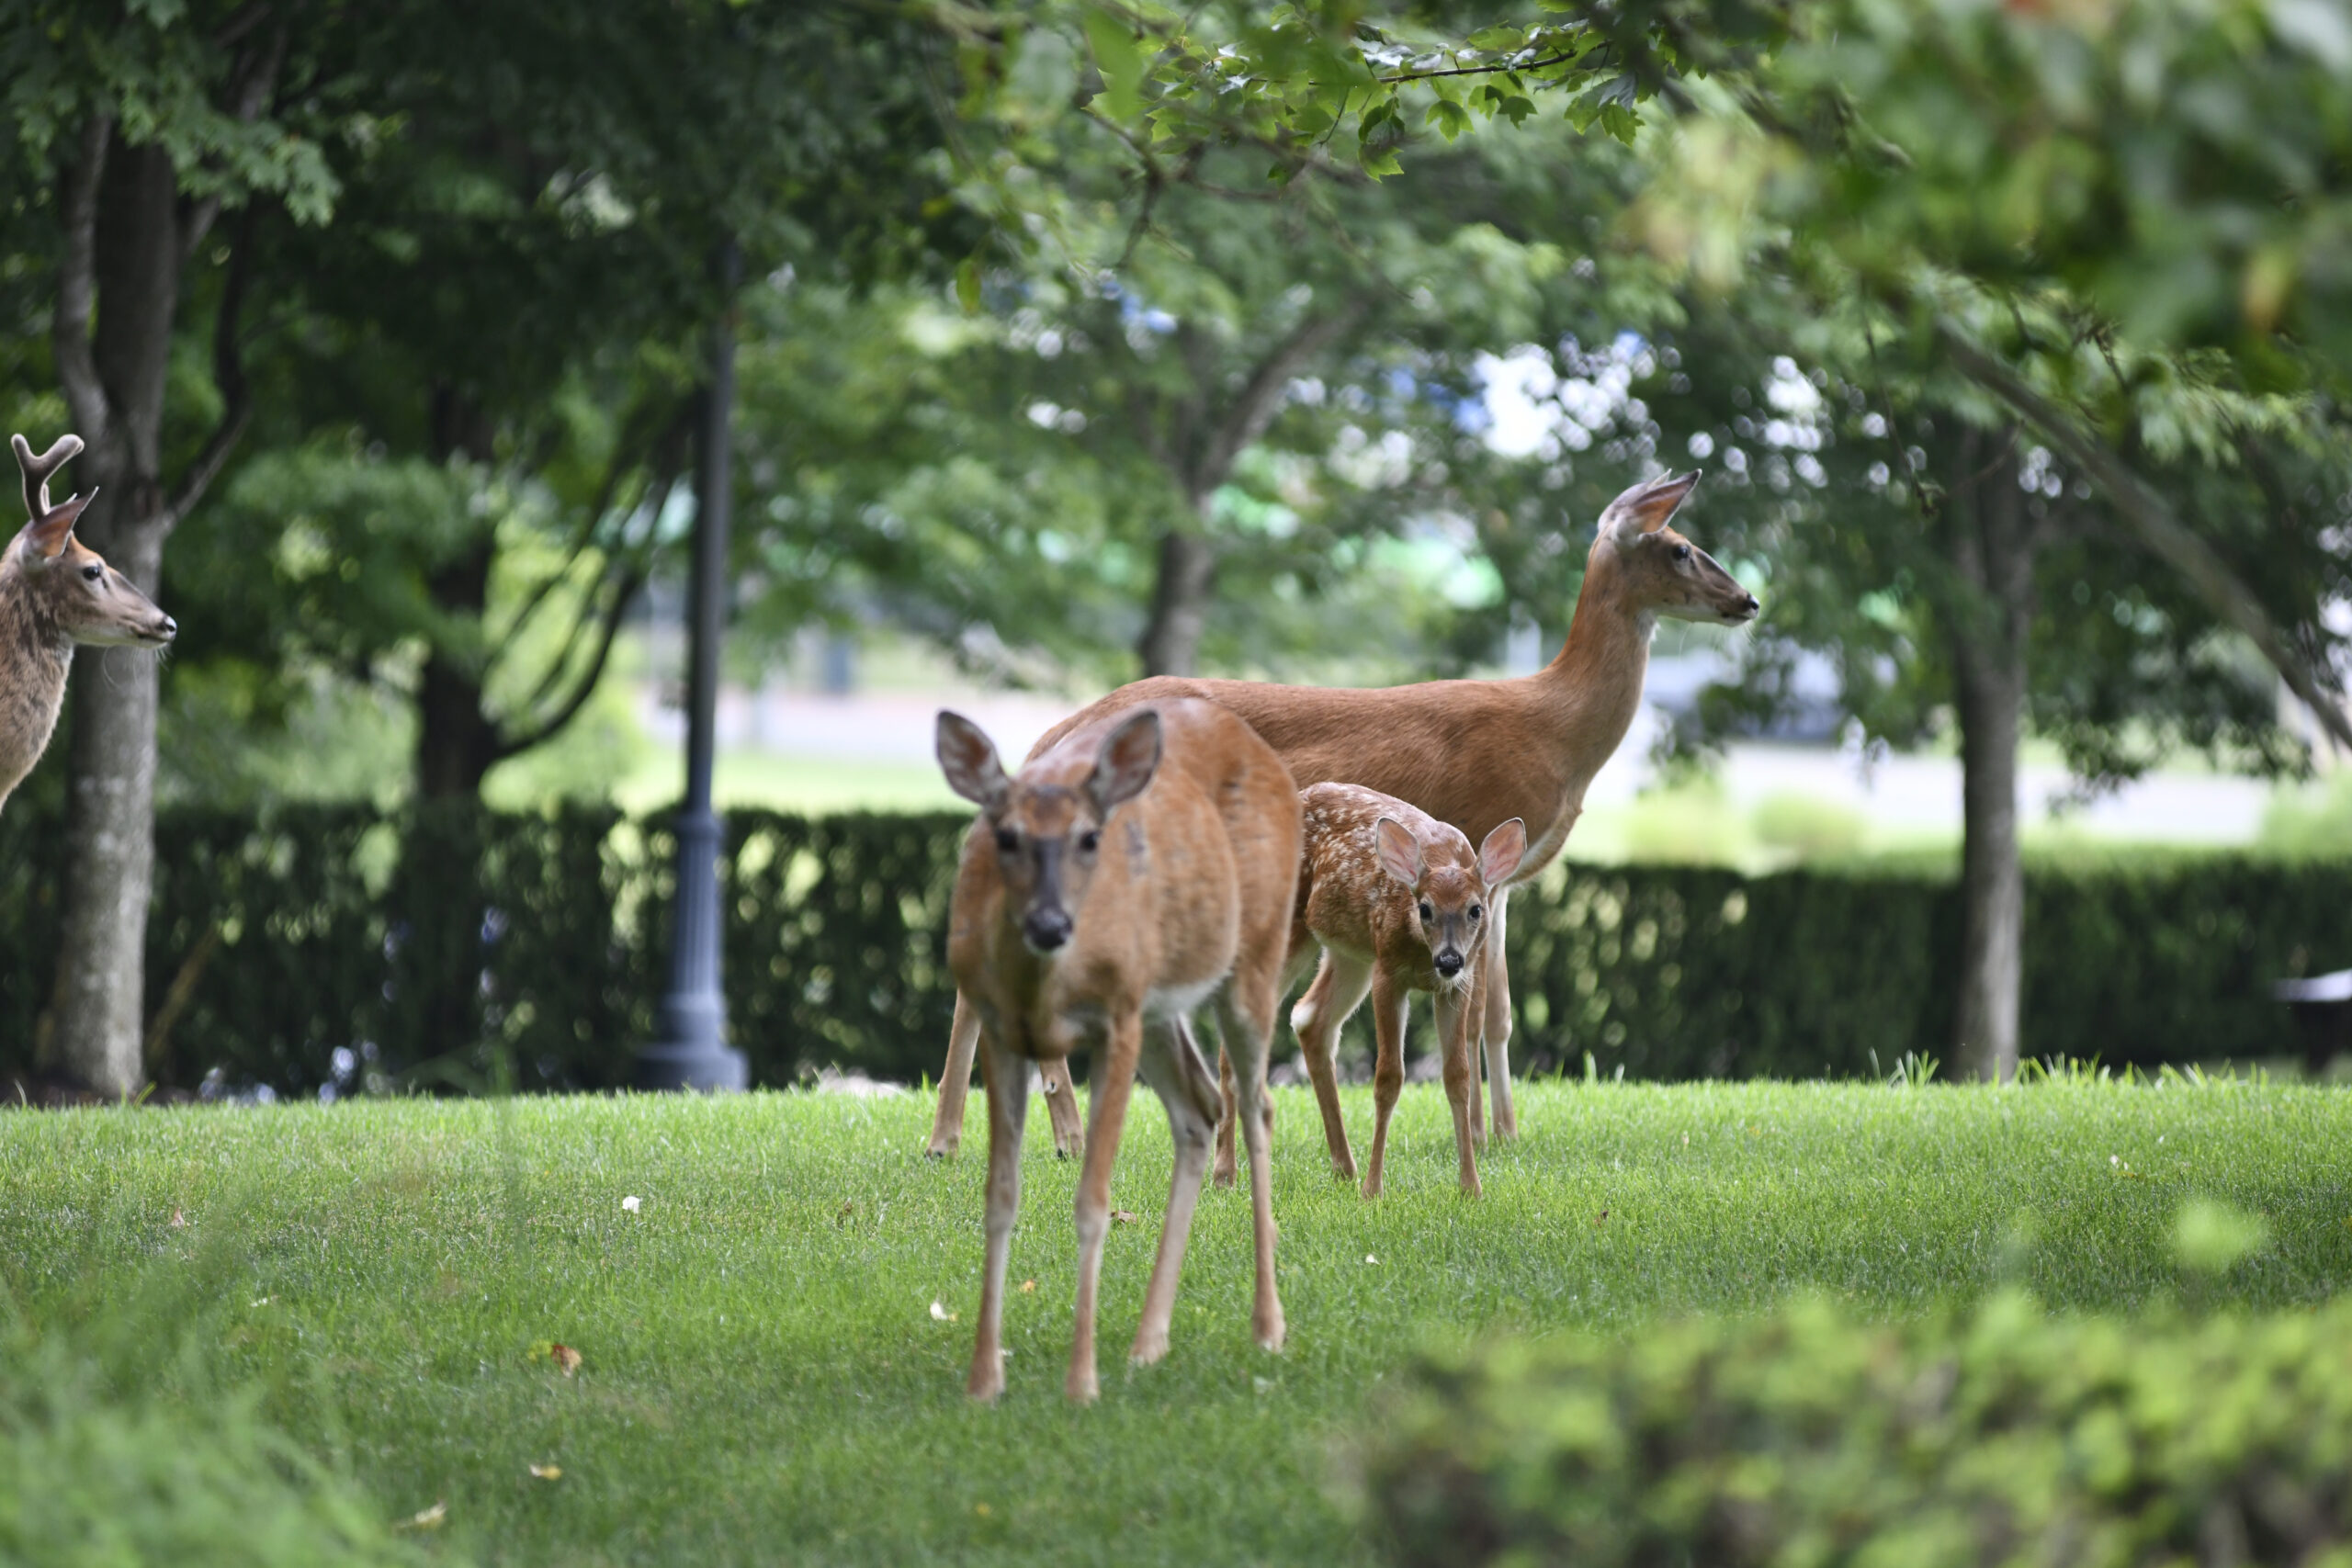 Deer on the premises of The Southampton Press office in Southampton Village.   DANA SHAW